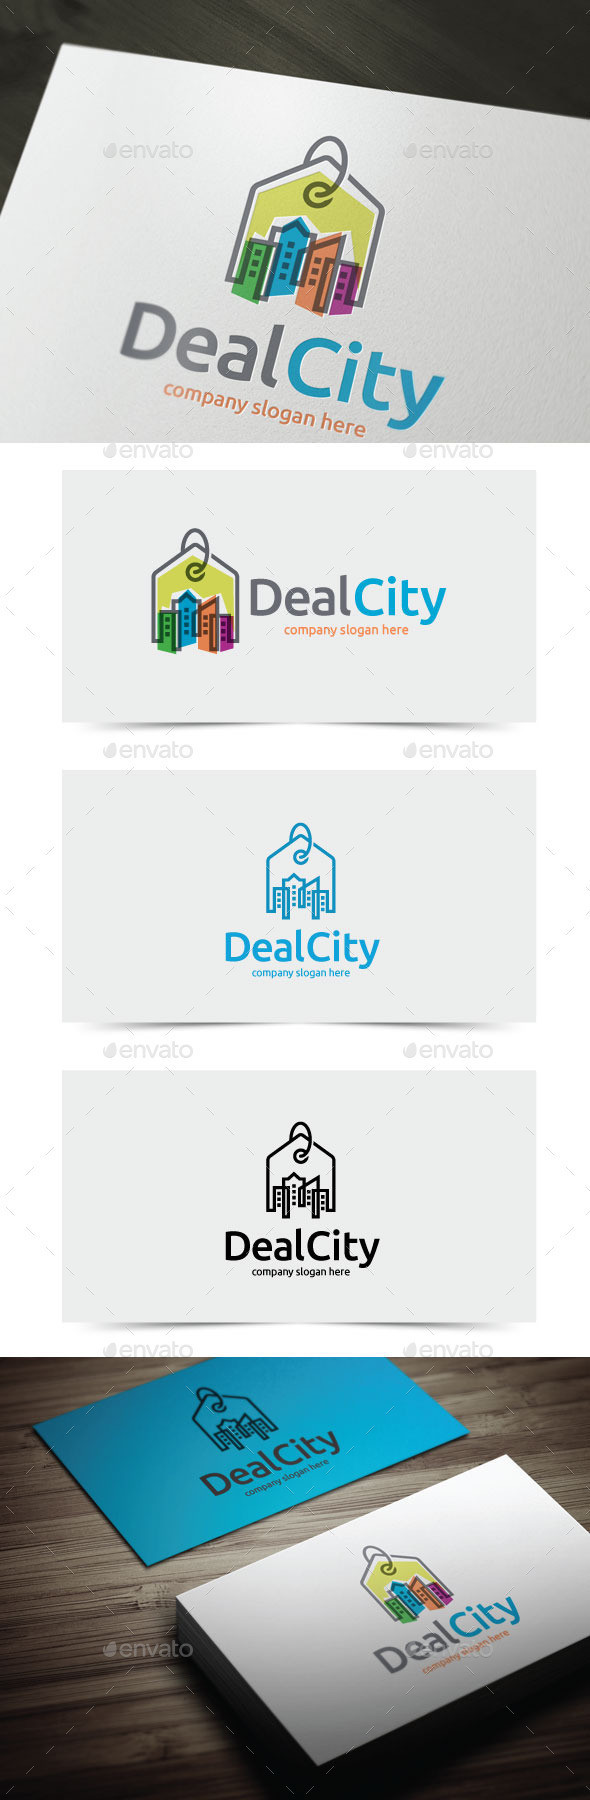 Deal city preview